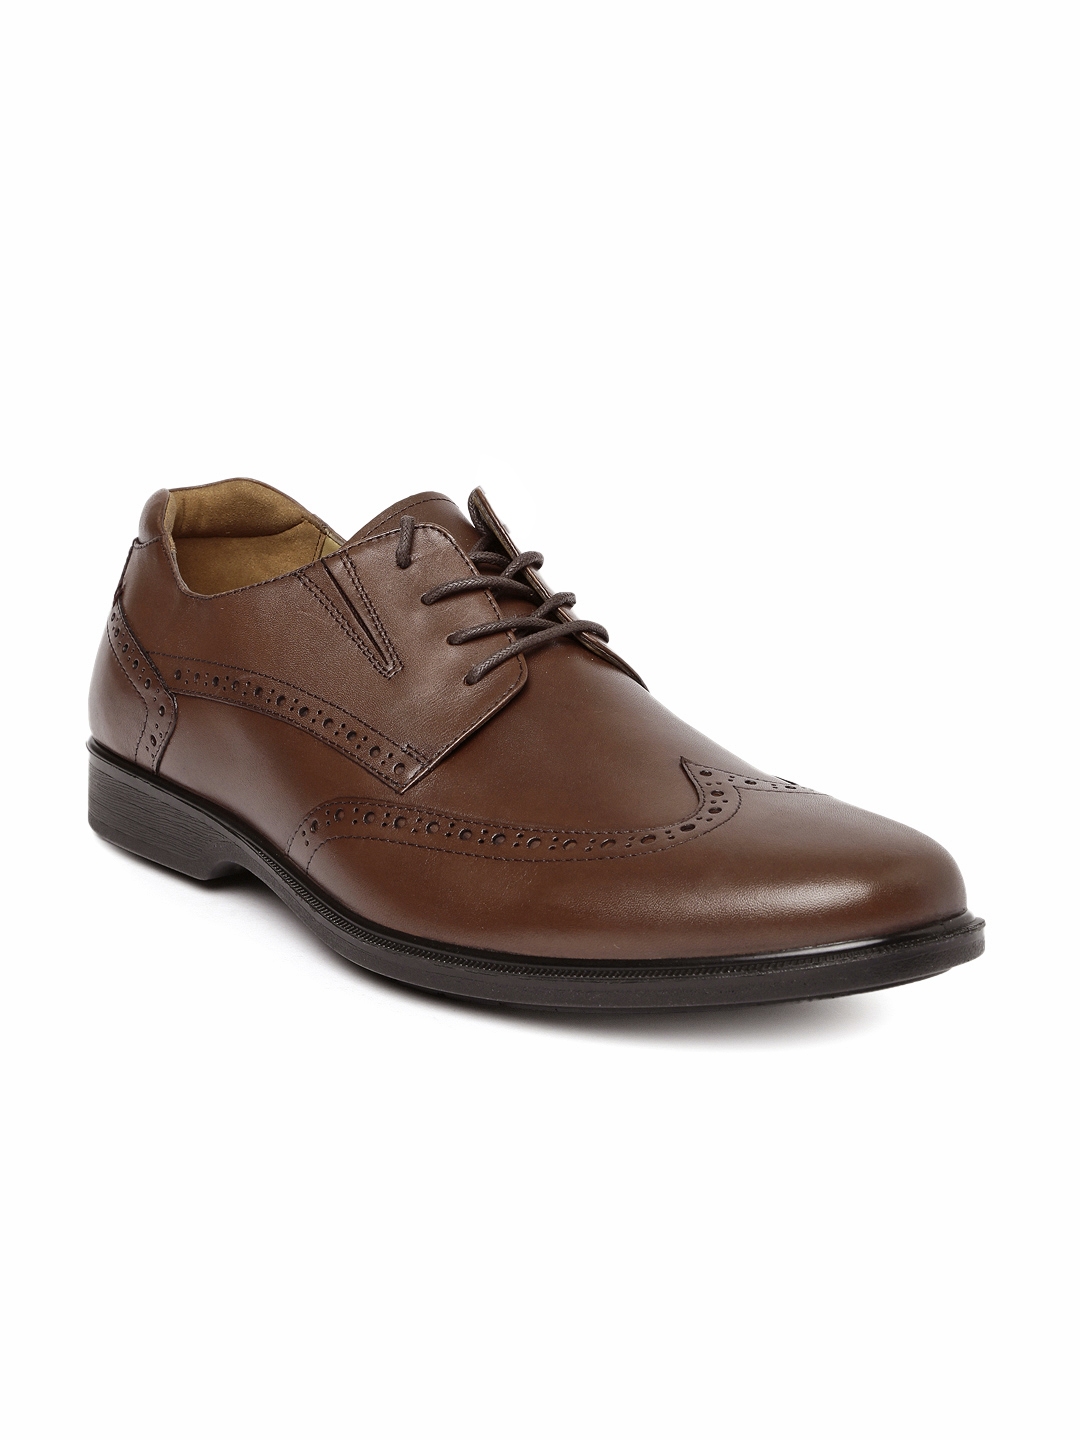 Buy Hush Puppies Men Leather Brown Hartley Leather Brogues - Formal ...